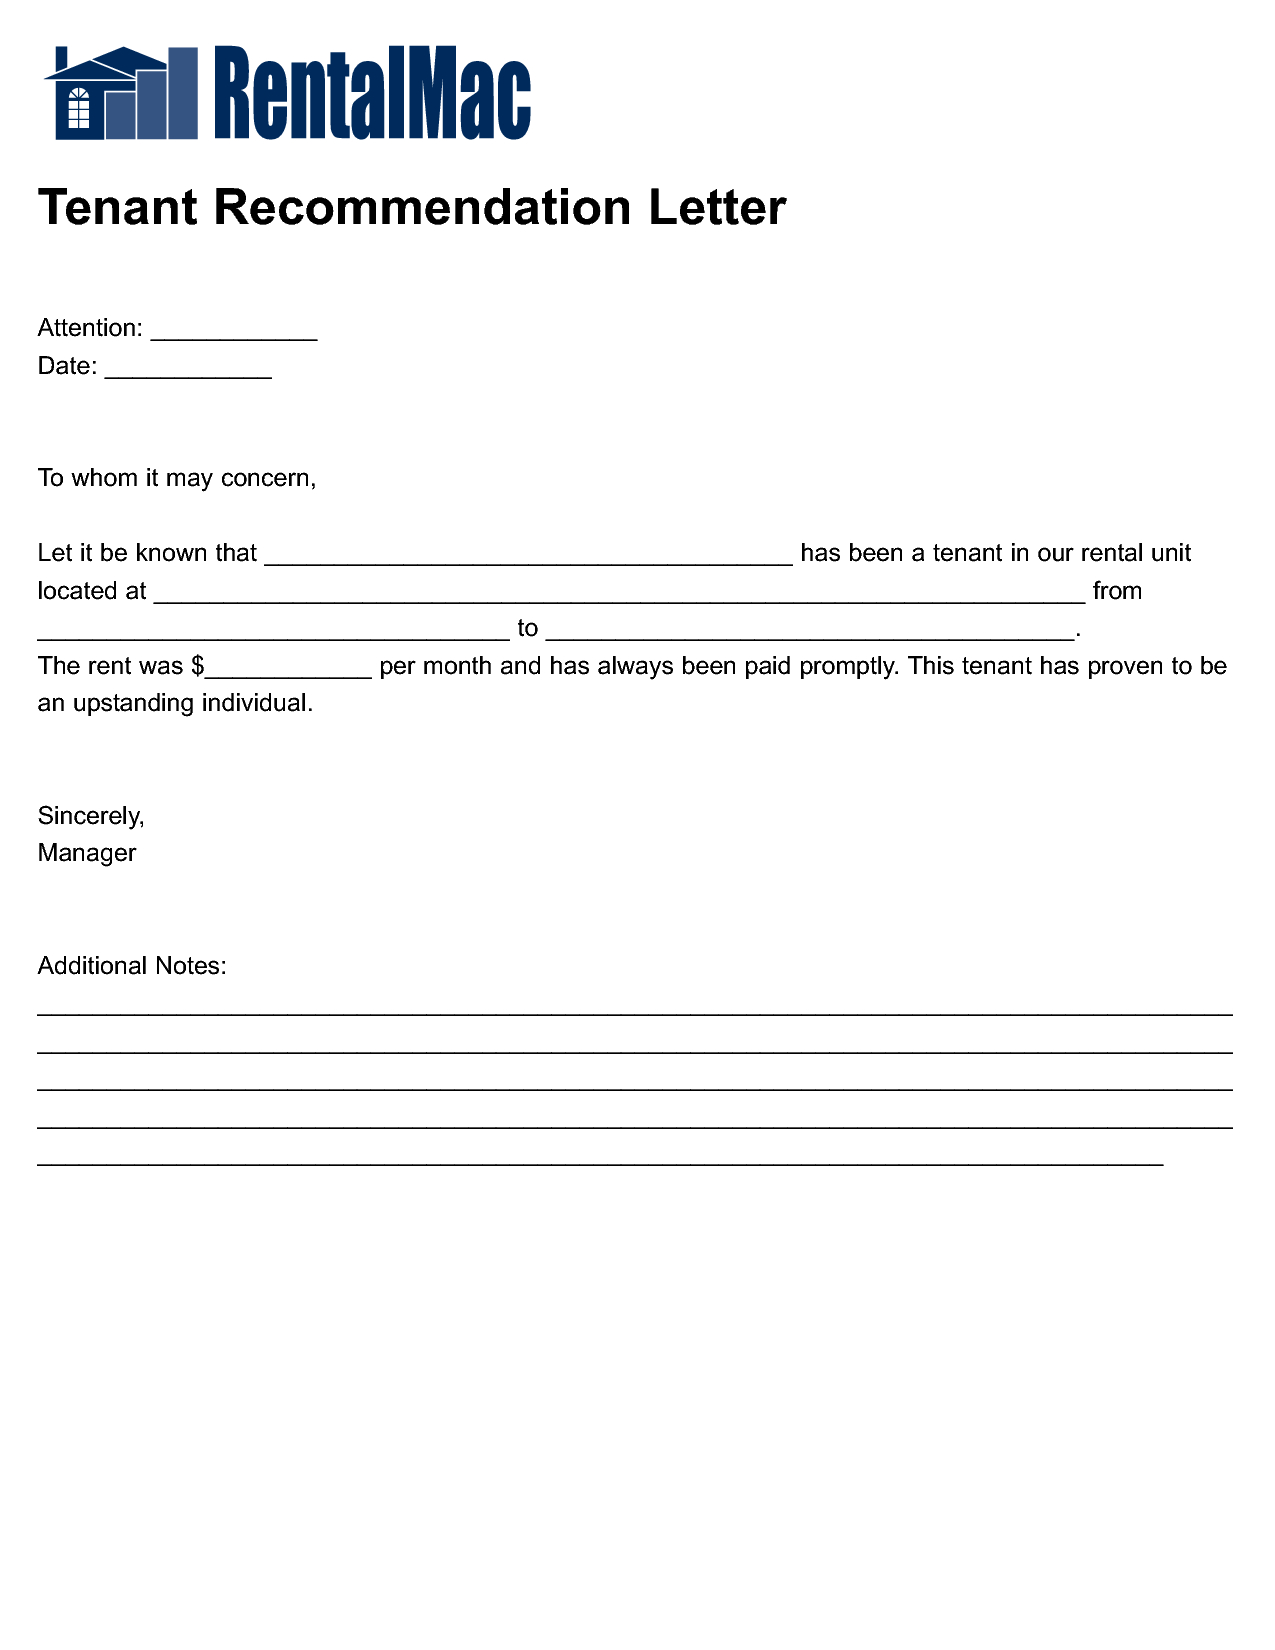 Tenant Recommendation Letter Template - Housing Reference Letter Image Collections Letter format formal Sample